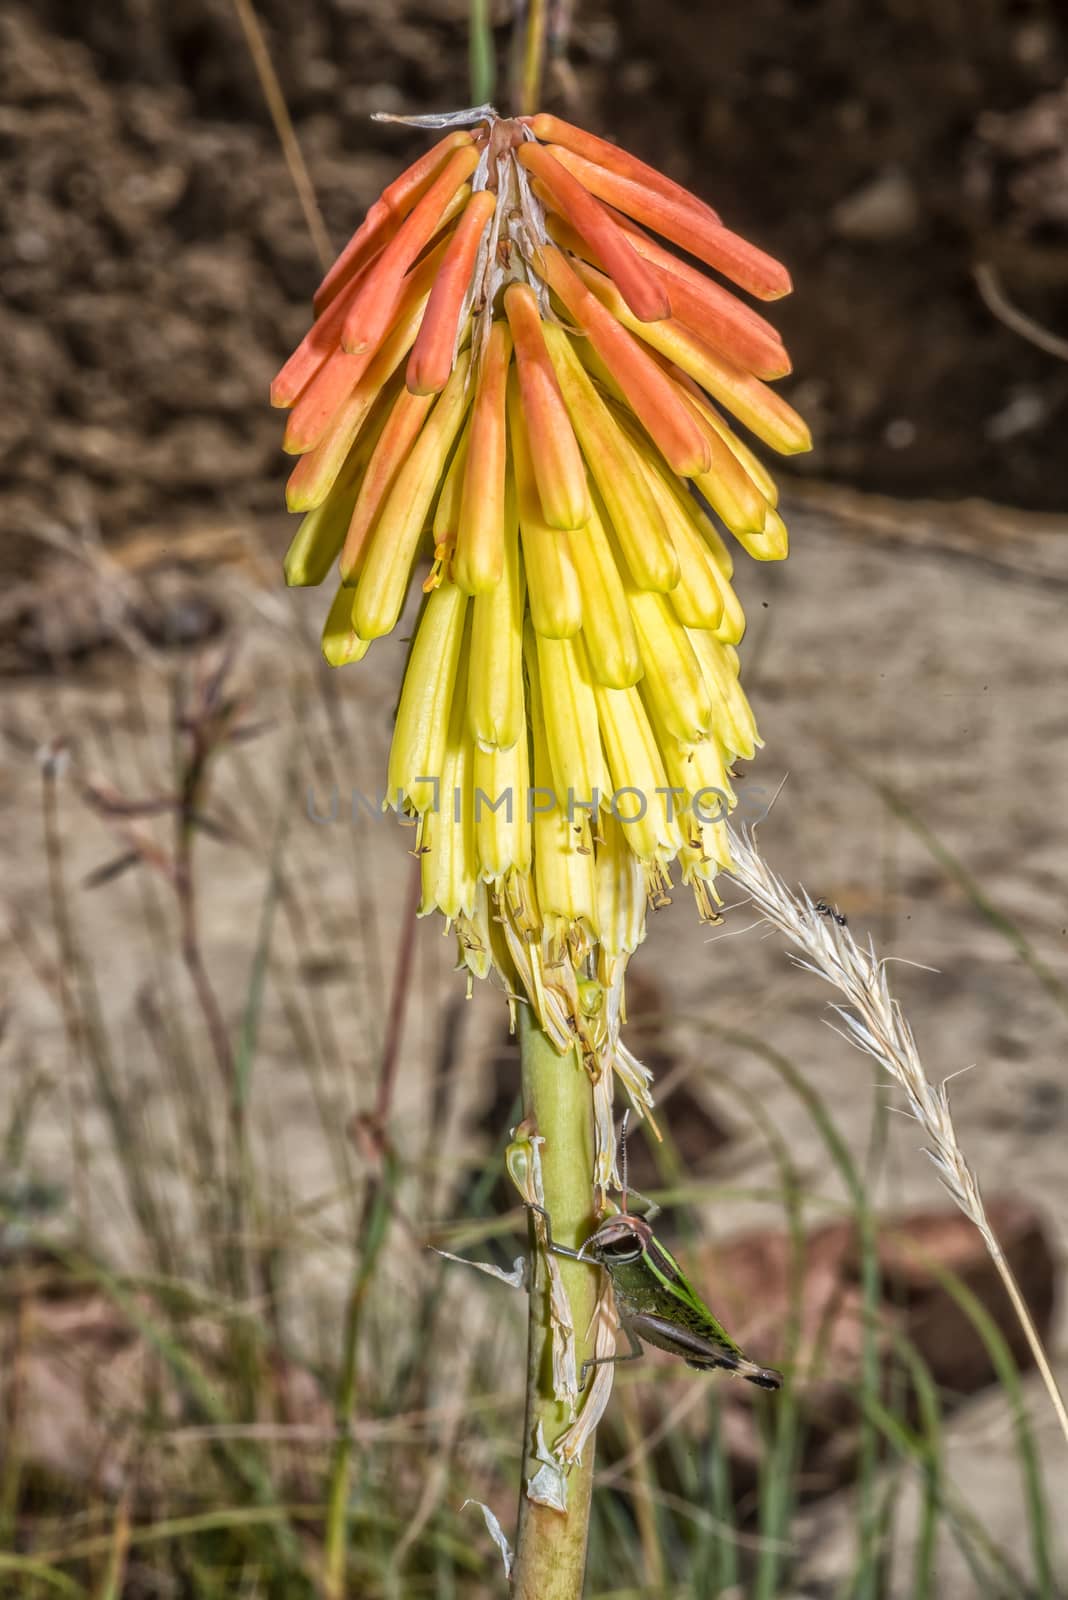 The flower of a Red-hot Poker, Kniphofia porphyrantha, at Golden Gate in the Free State Province. A grasshopper is visible